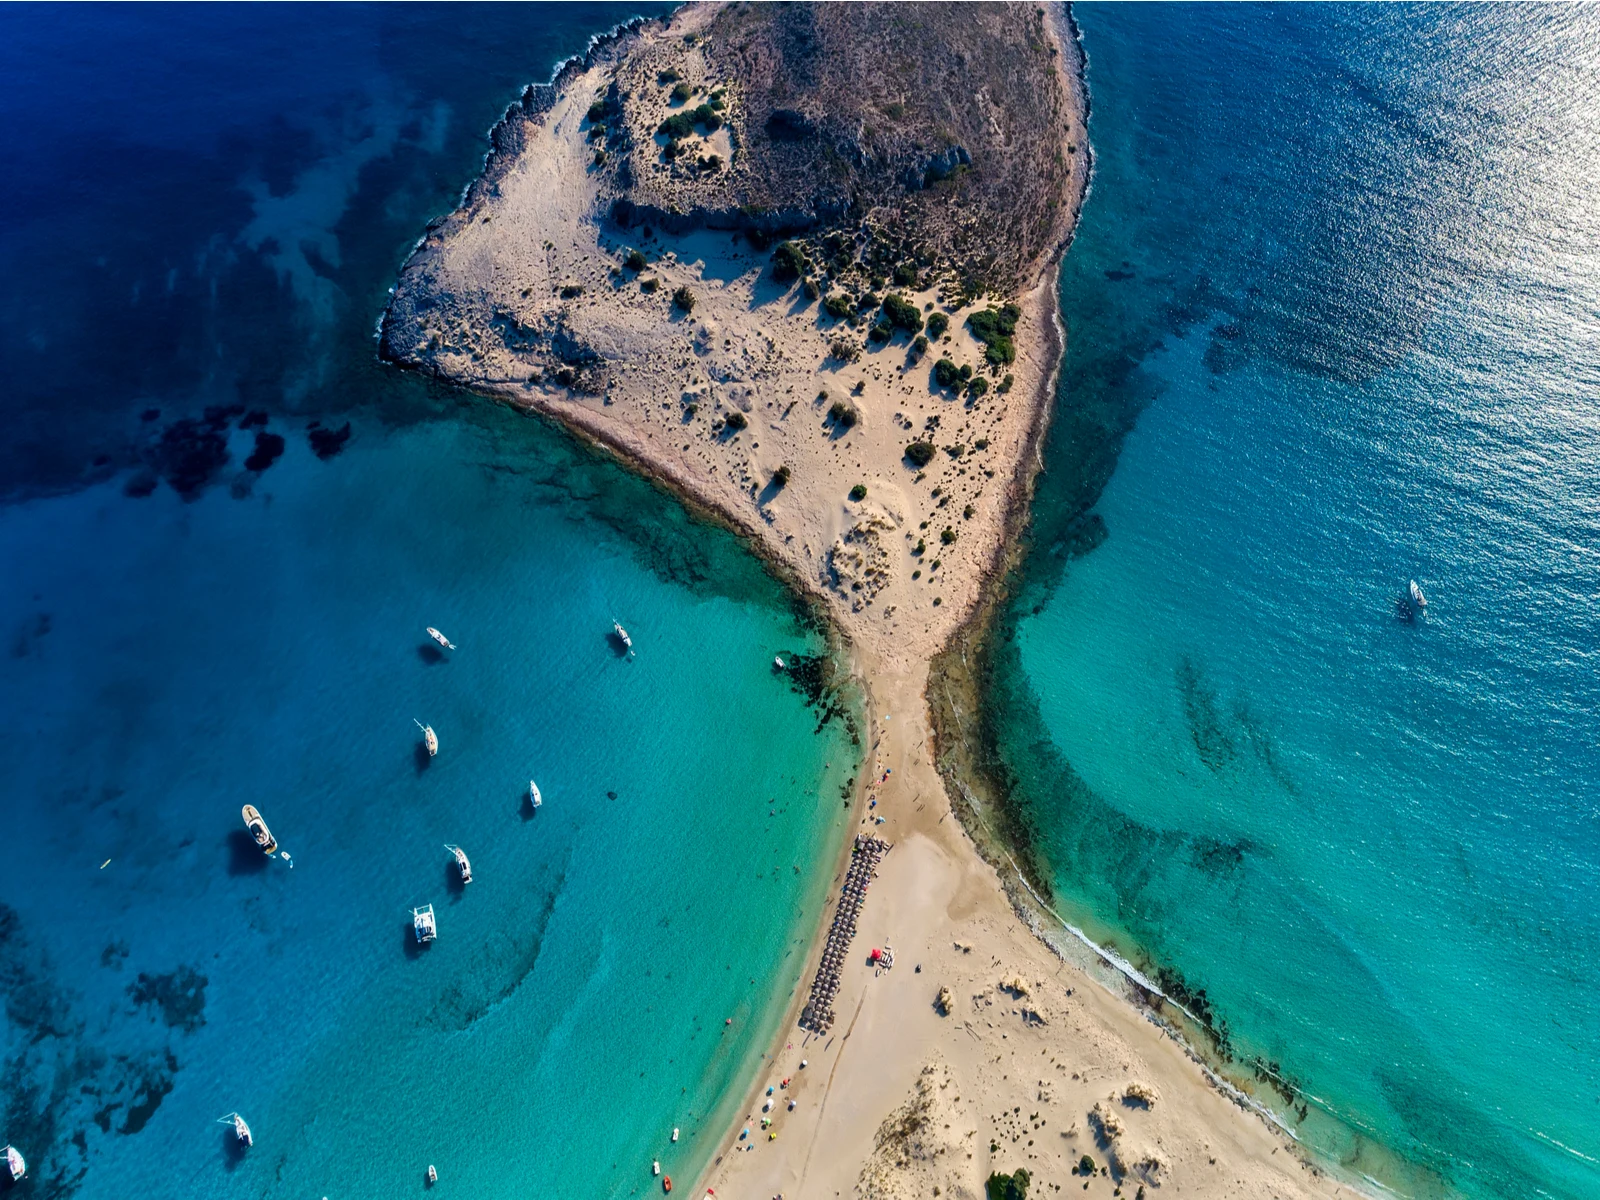 Simos, Elafonisos, one of the best beaches in Greece, as viewed from the air overhead